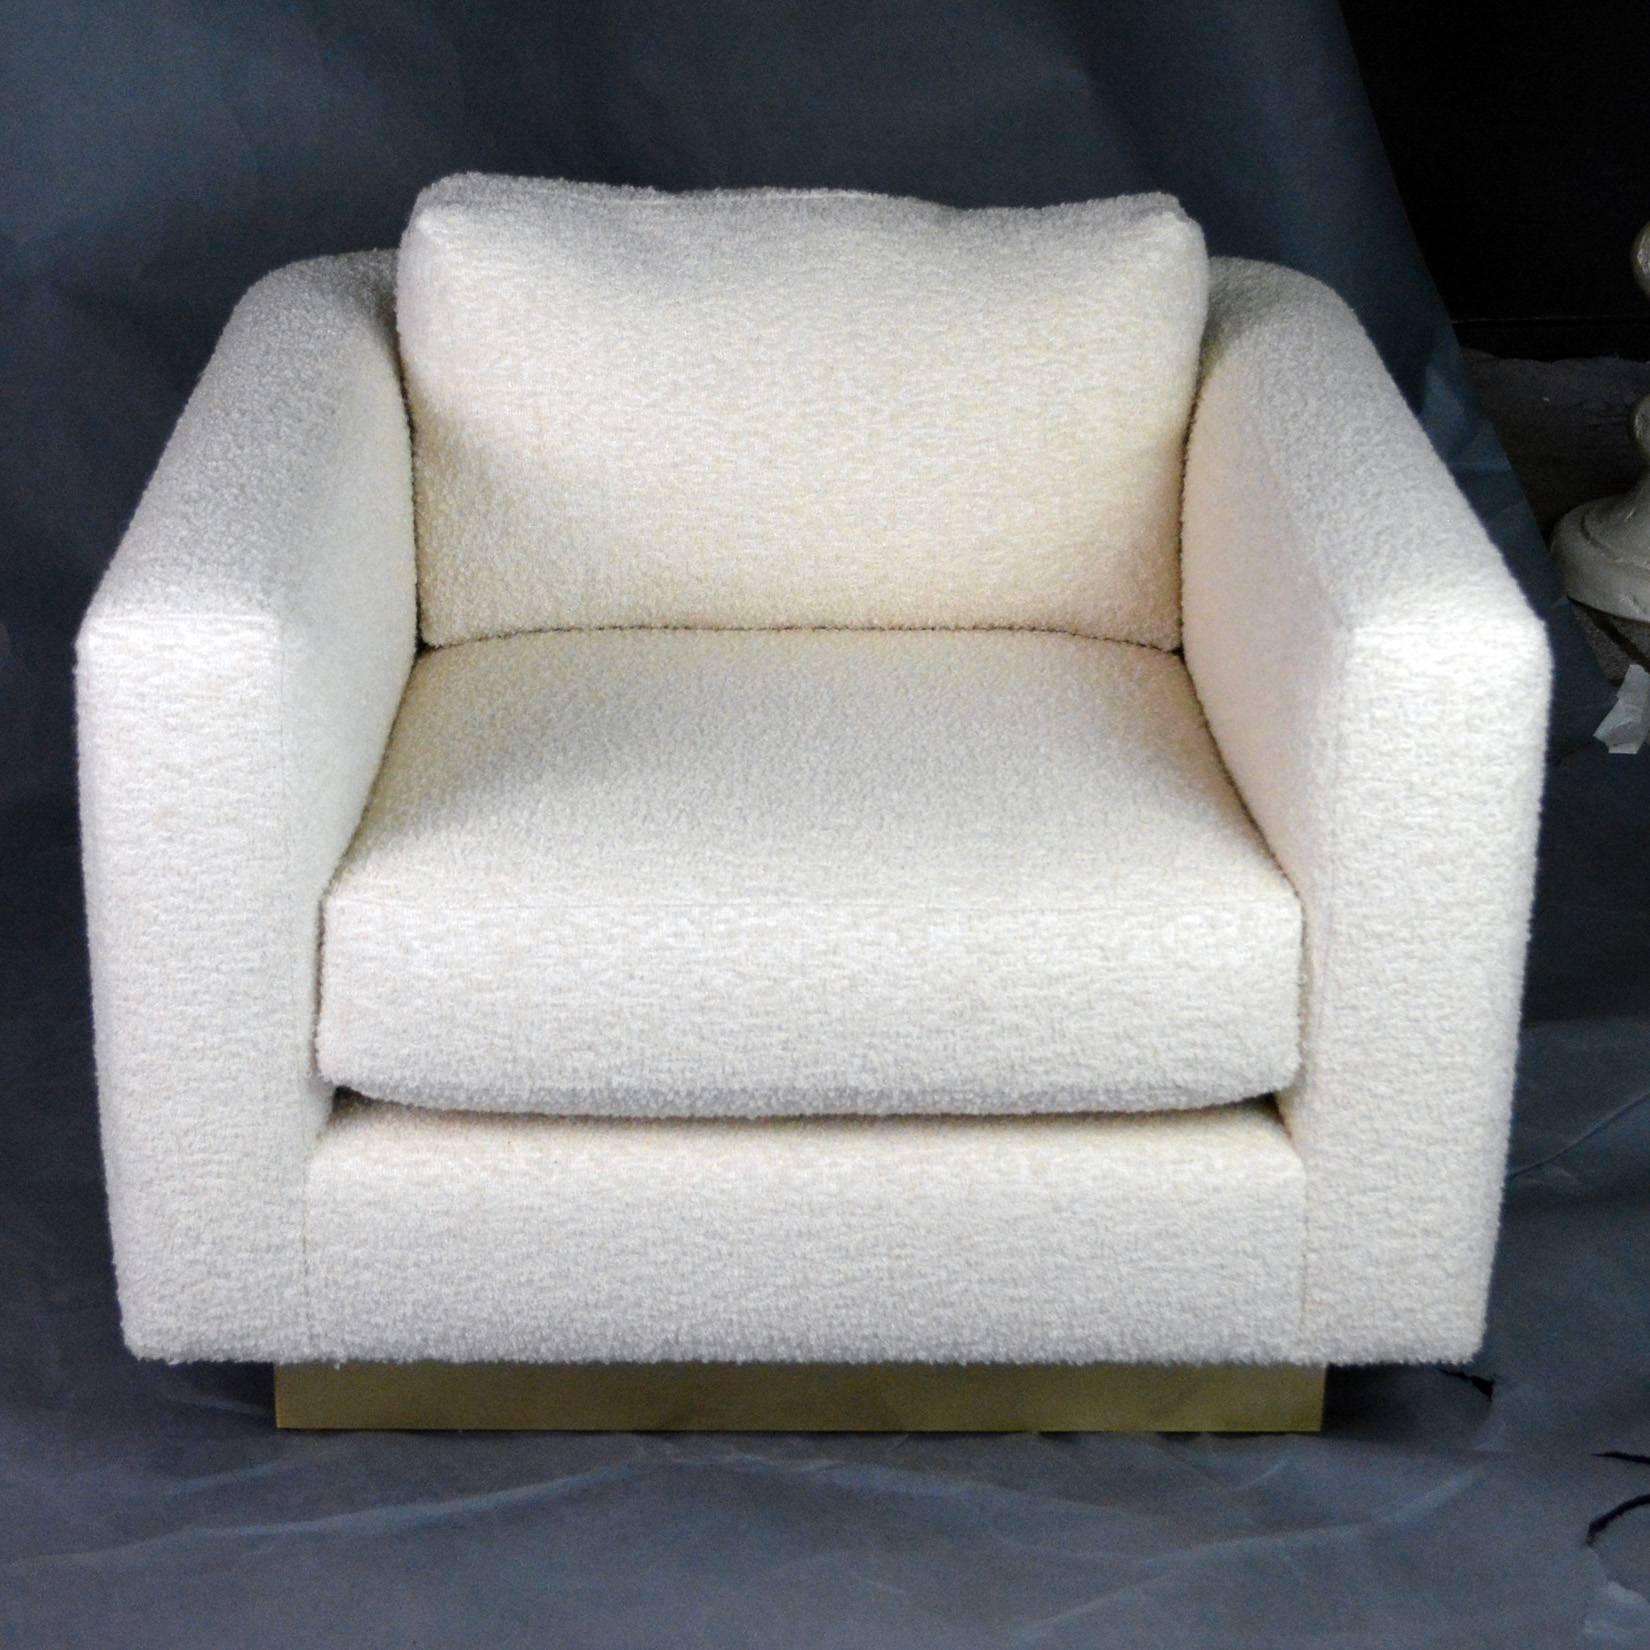 Pair of 1980s club chairs in new ivory wool bouclé. Chic "floating cube" design on a recessed satin brass base with a nice seam detail at the rear. Attributed to Steve Chase but unmarked.